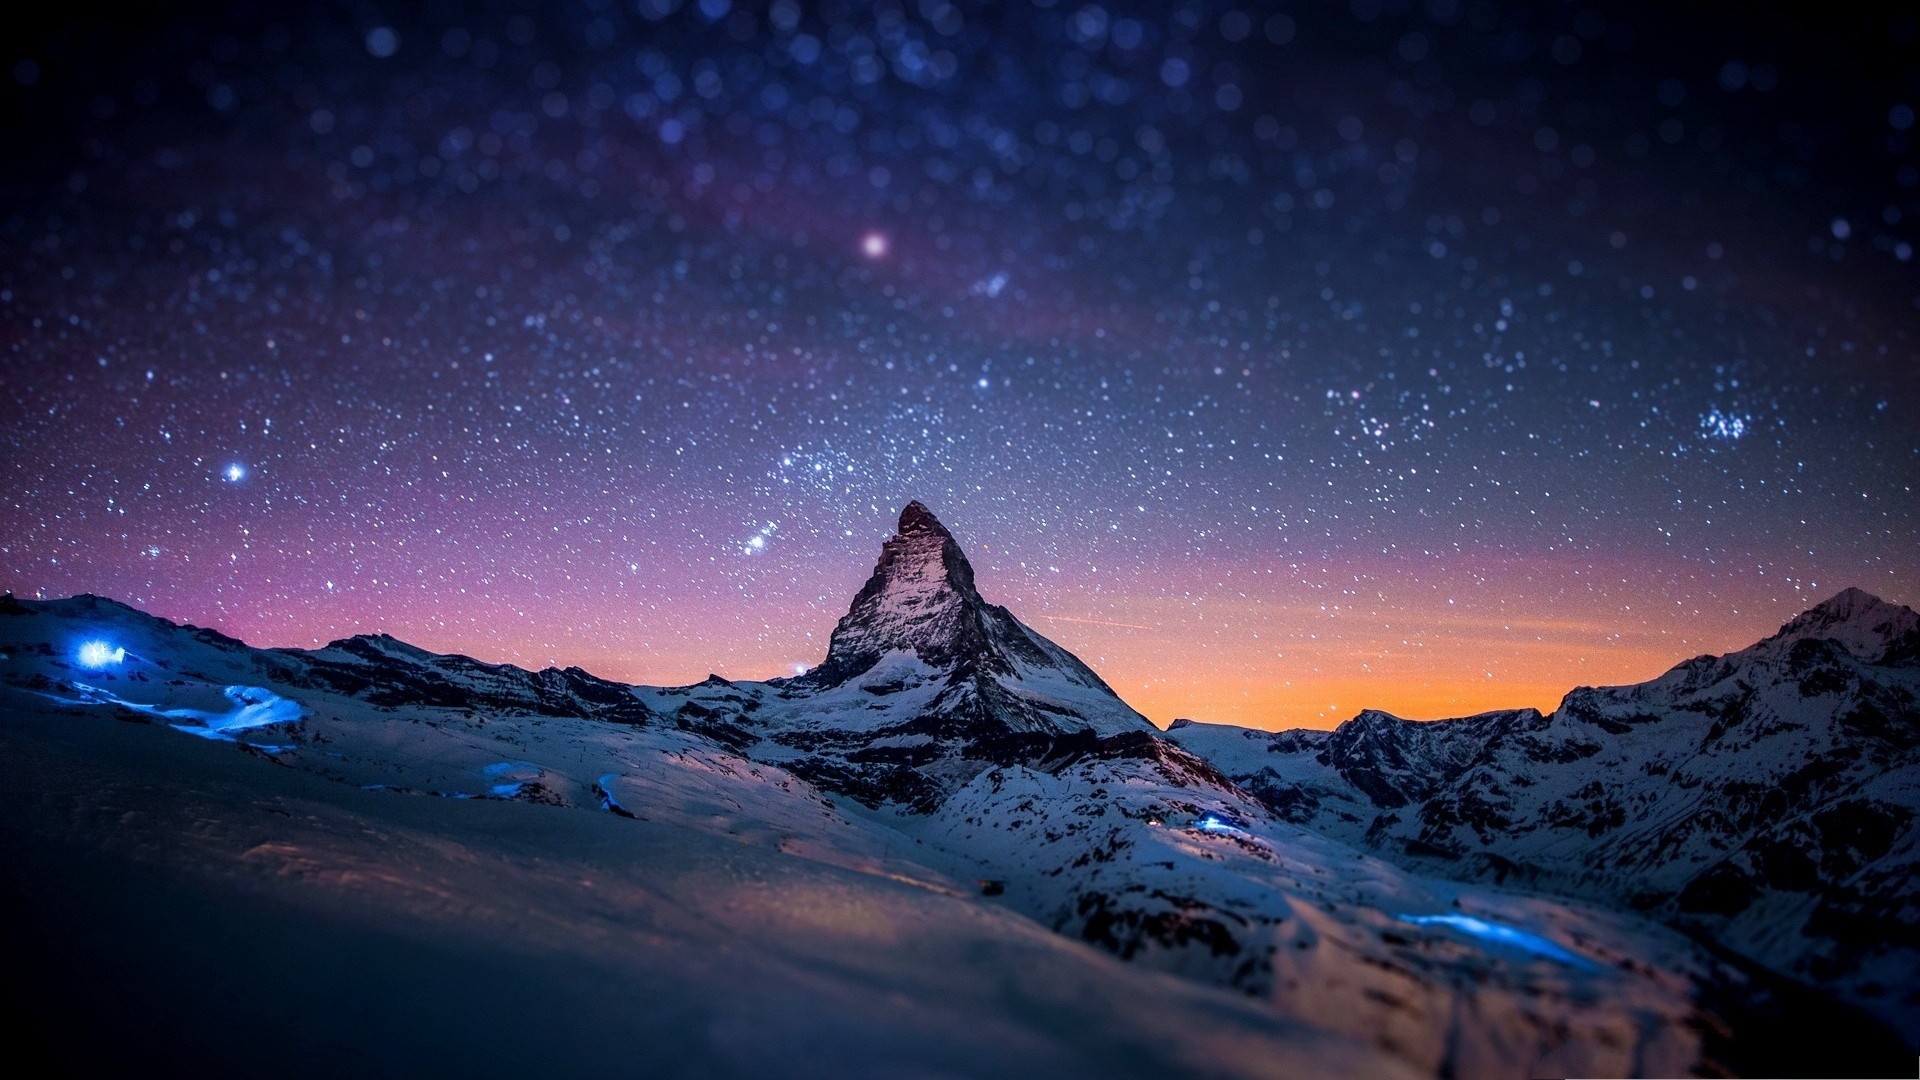 Snowy Winter Night Mountains With Snow Hd Wallpaper For Desktop 1920x1080 :  